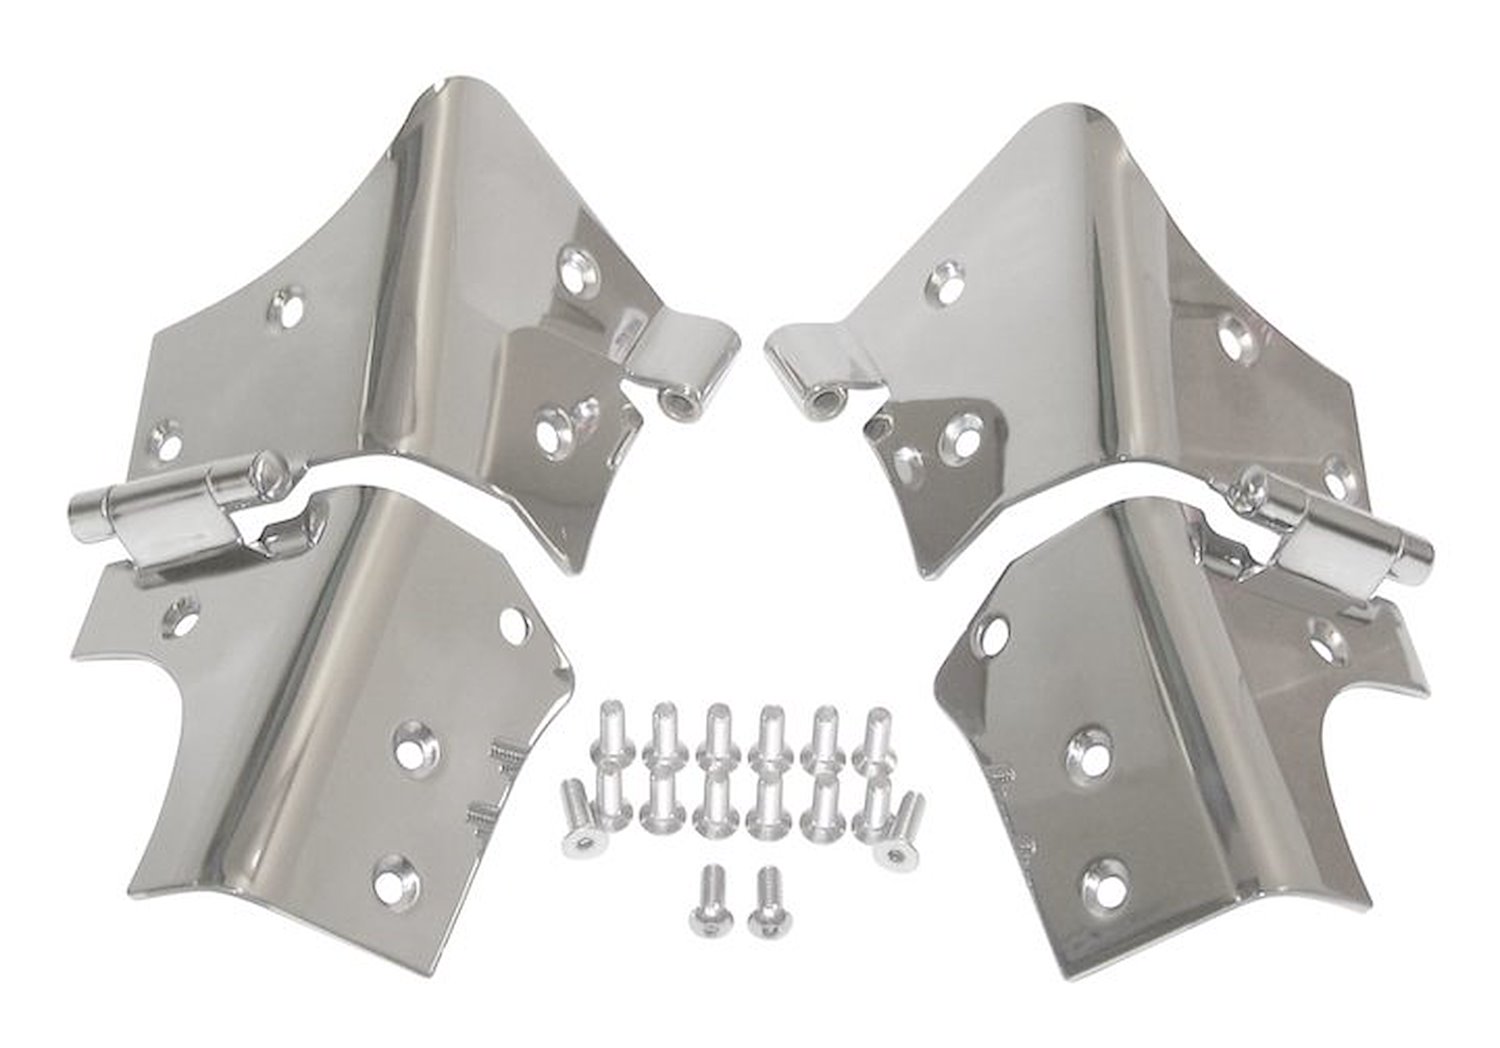 RT34066 Stainless Steel Windshield Hinge Set for 1997-2006 Jeep TJ Wrangler; Includes 2 Hinges and Hardware